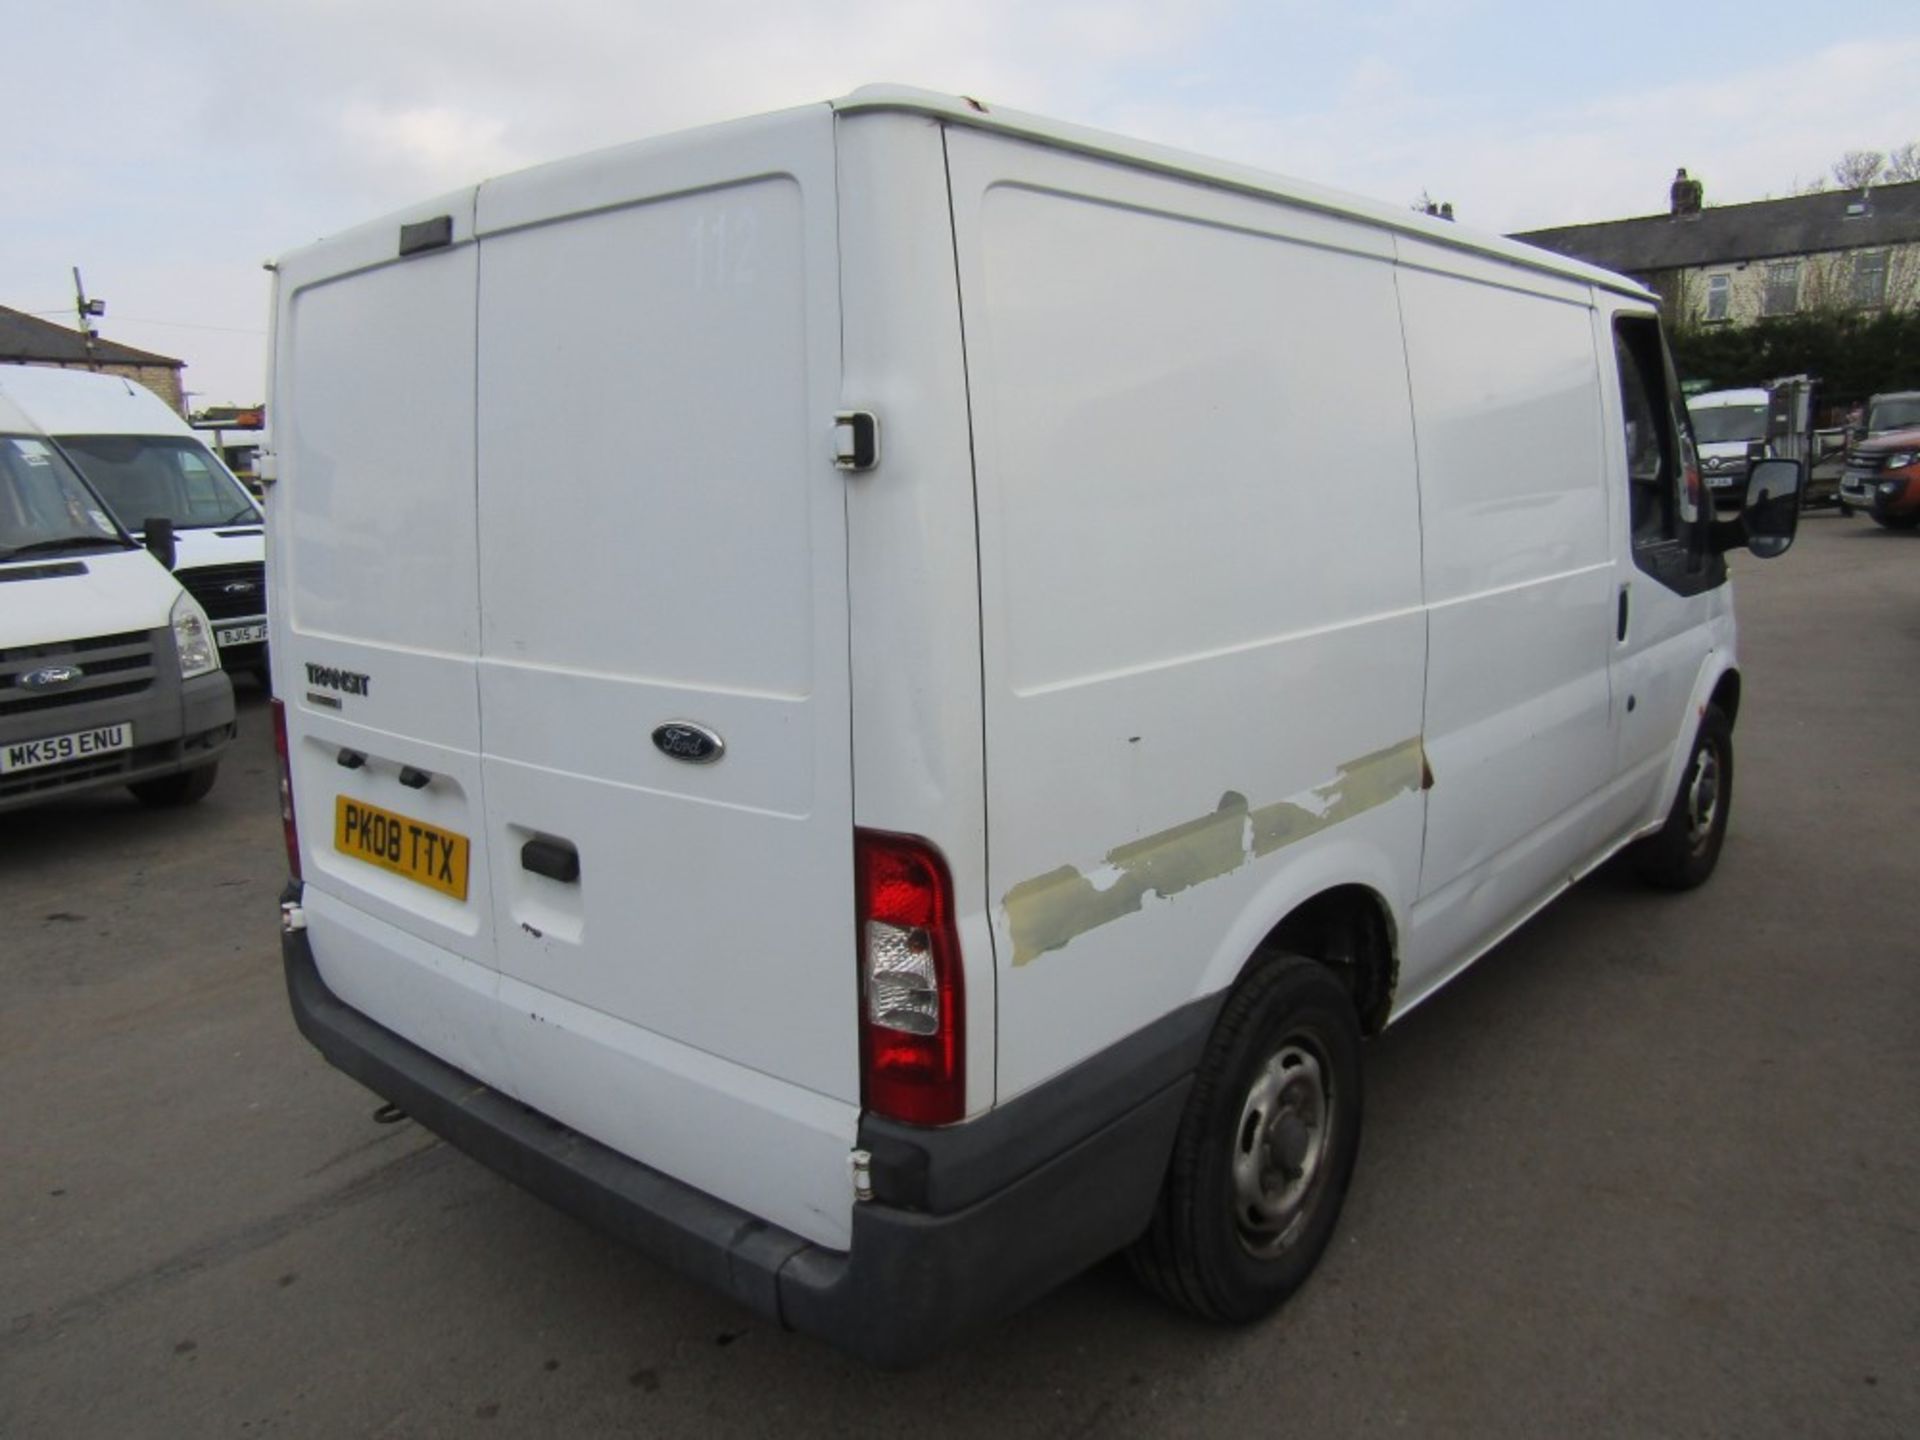 08 reg FORD TRANSIT 85 T280S FWD (DIRECT COUNCIL) 1ST REG 03/08, 97398M, V5 MAY FOLLOW [+ VAT] - Image 4 of 7